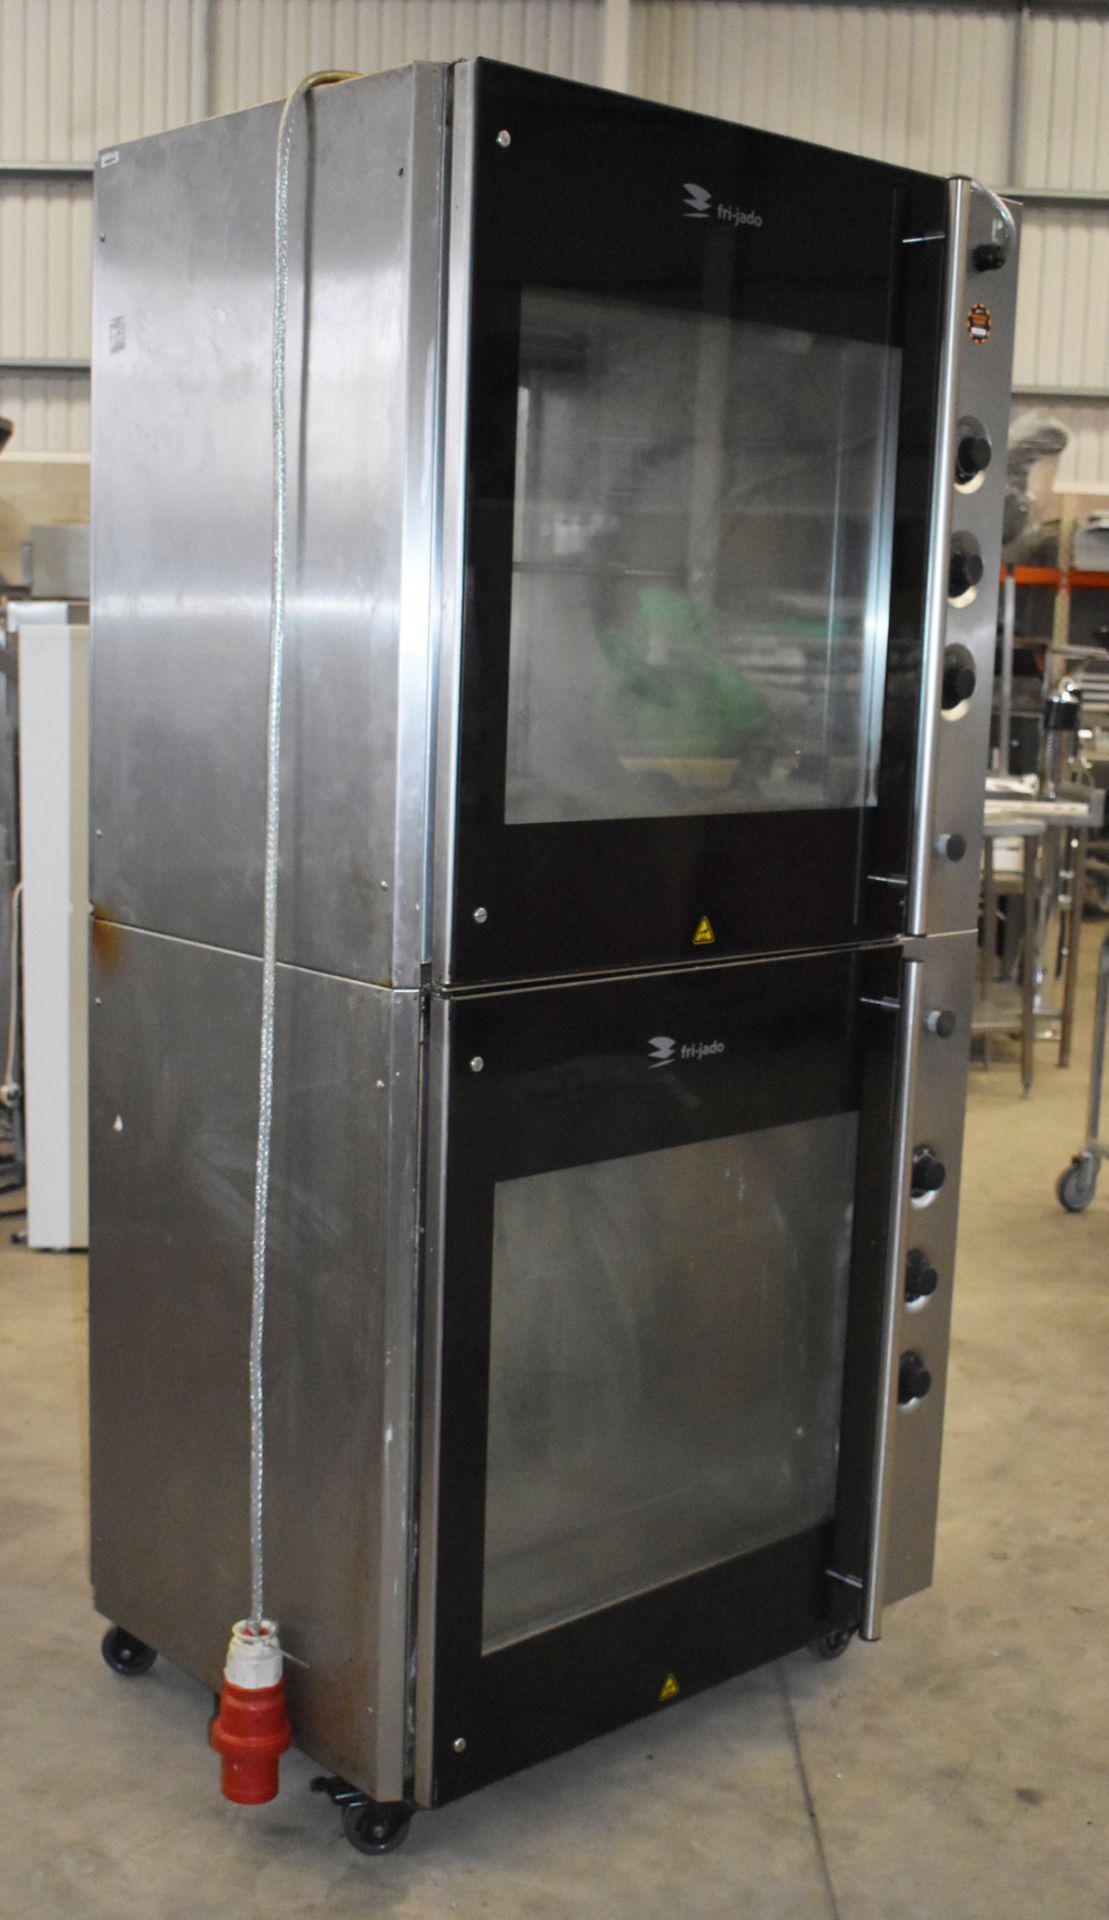 1 x Fri-Jado TDR8+8 Manual Chicken Rotisserie Double Oven - Holds 80 Chickens - CL453 - 3 Phase - Image 2 of 12